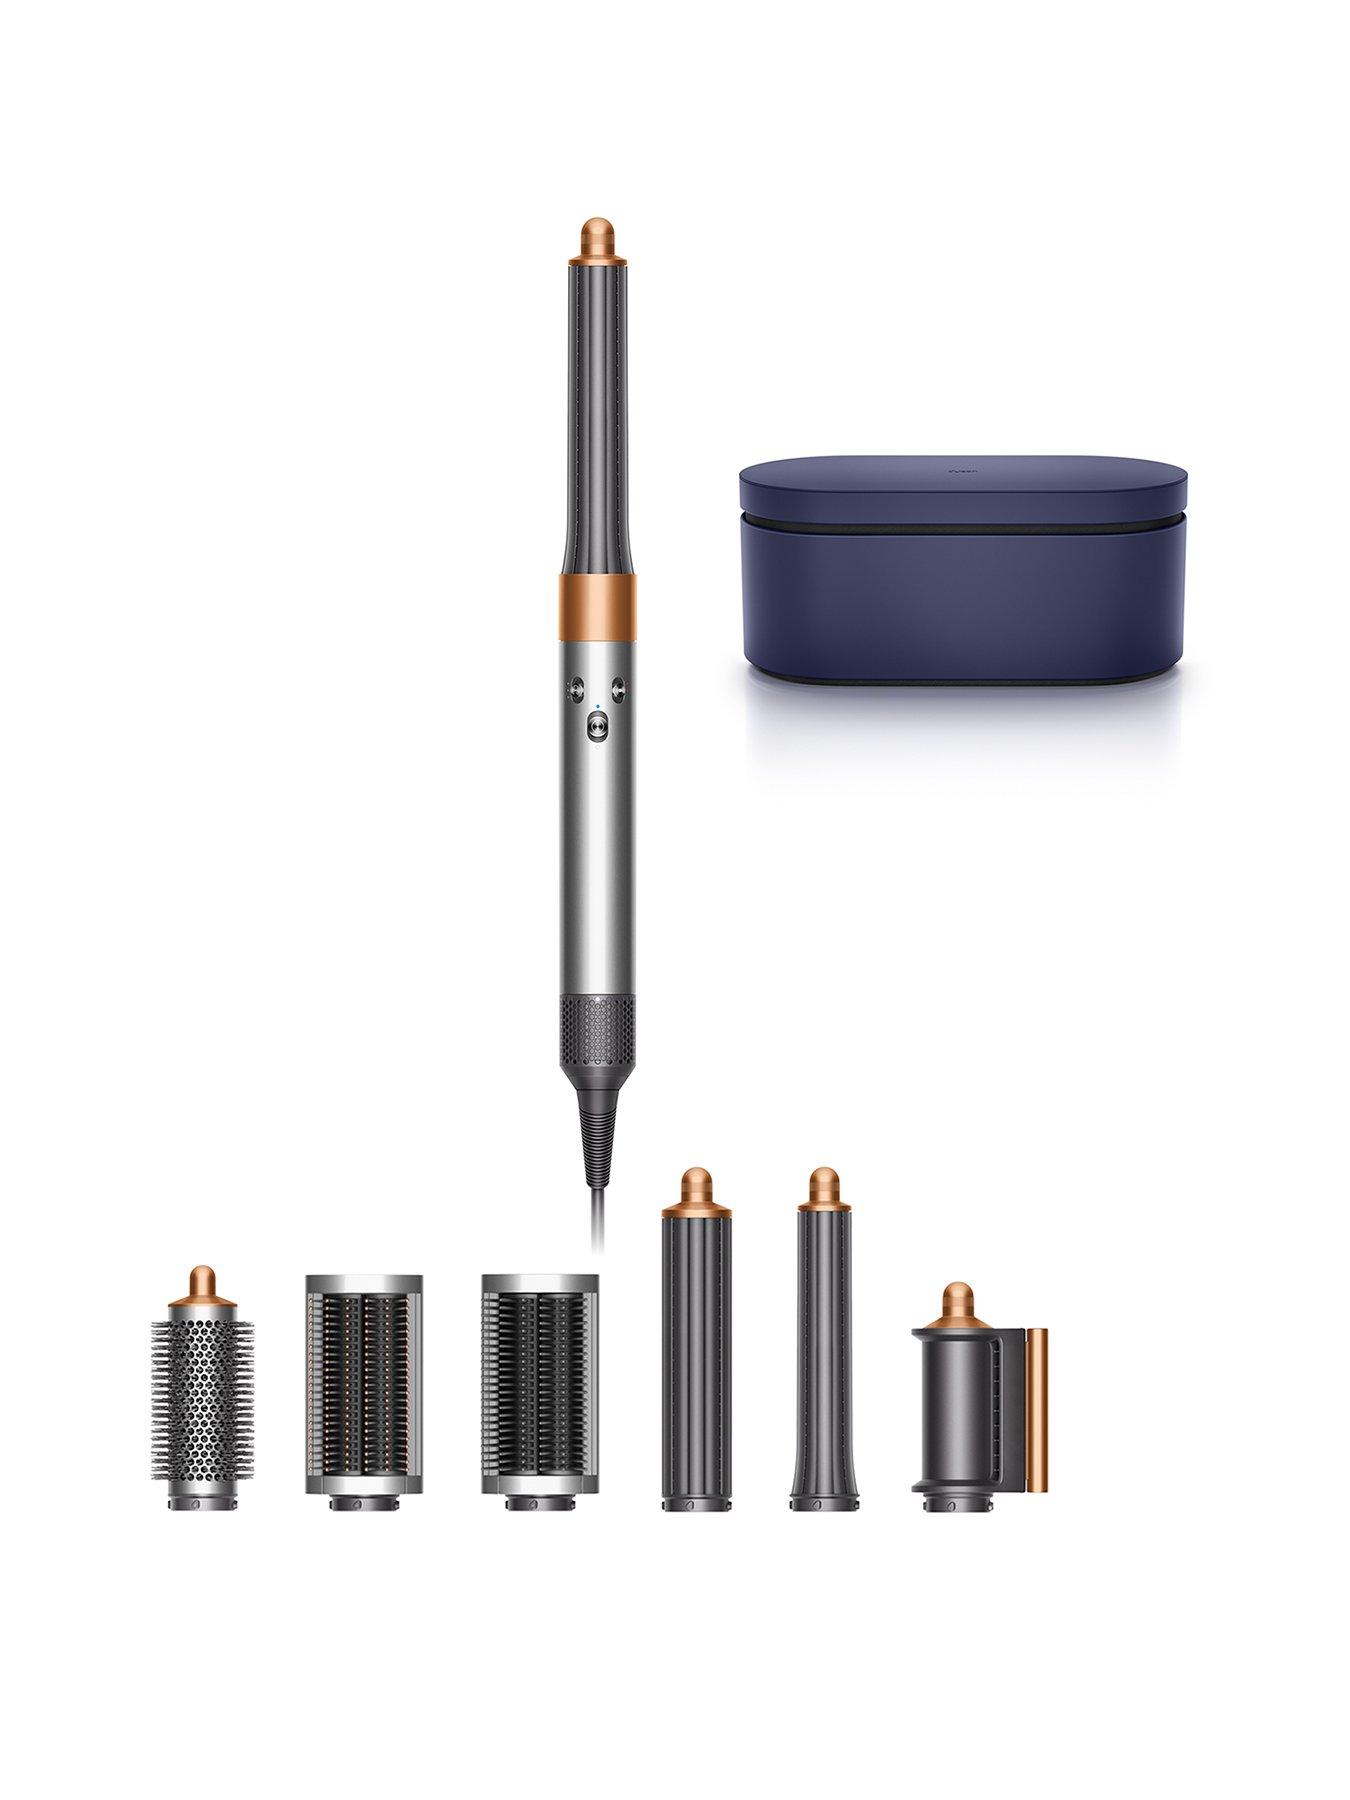  image of dyson-airwrap-multi-styler-and-dryer-with-presentation-case--nickel-and-copper